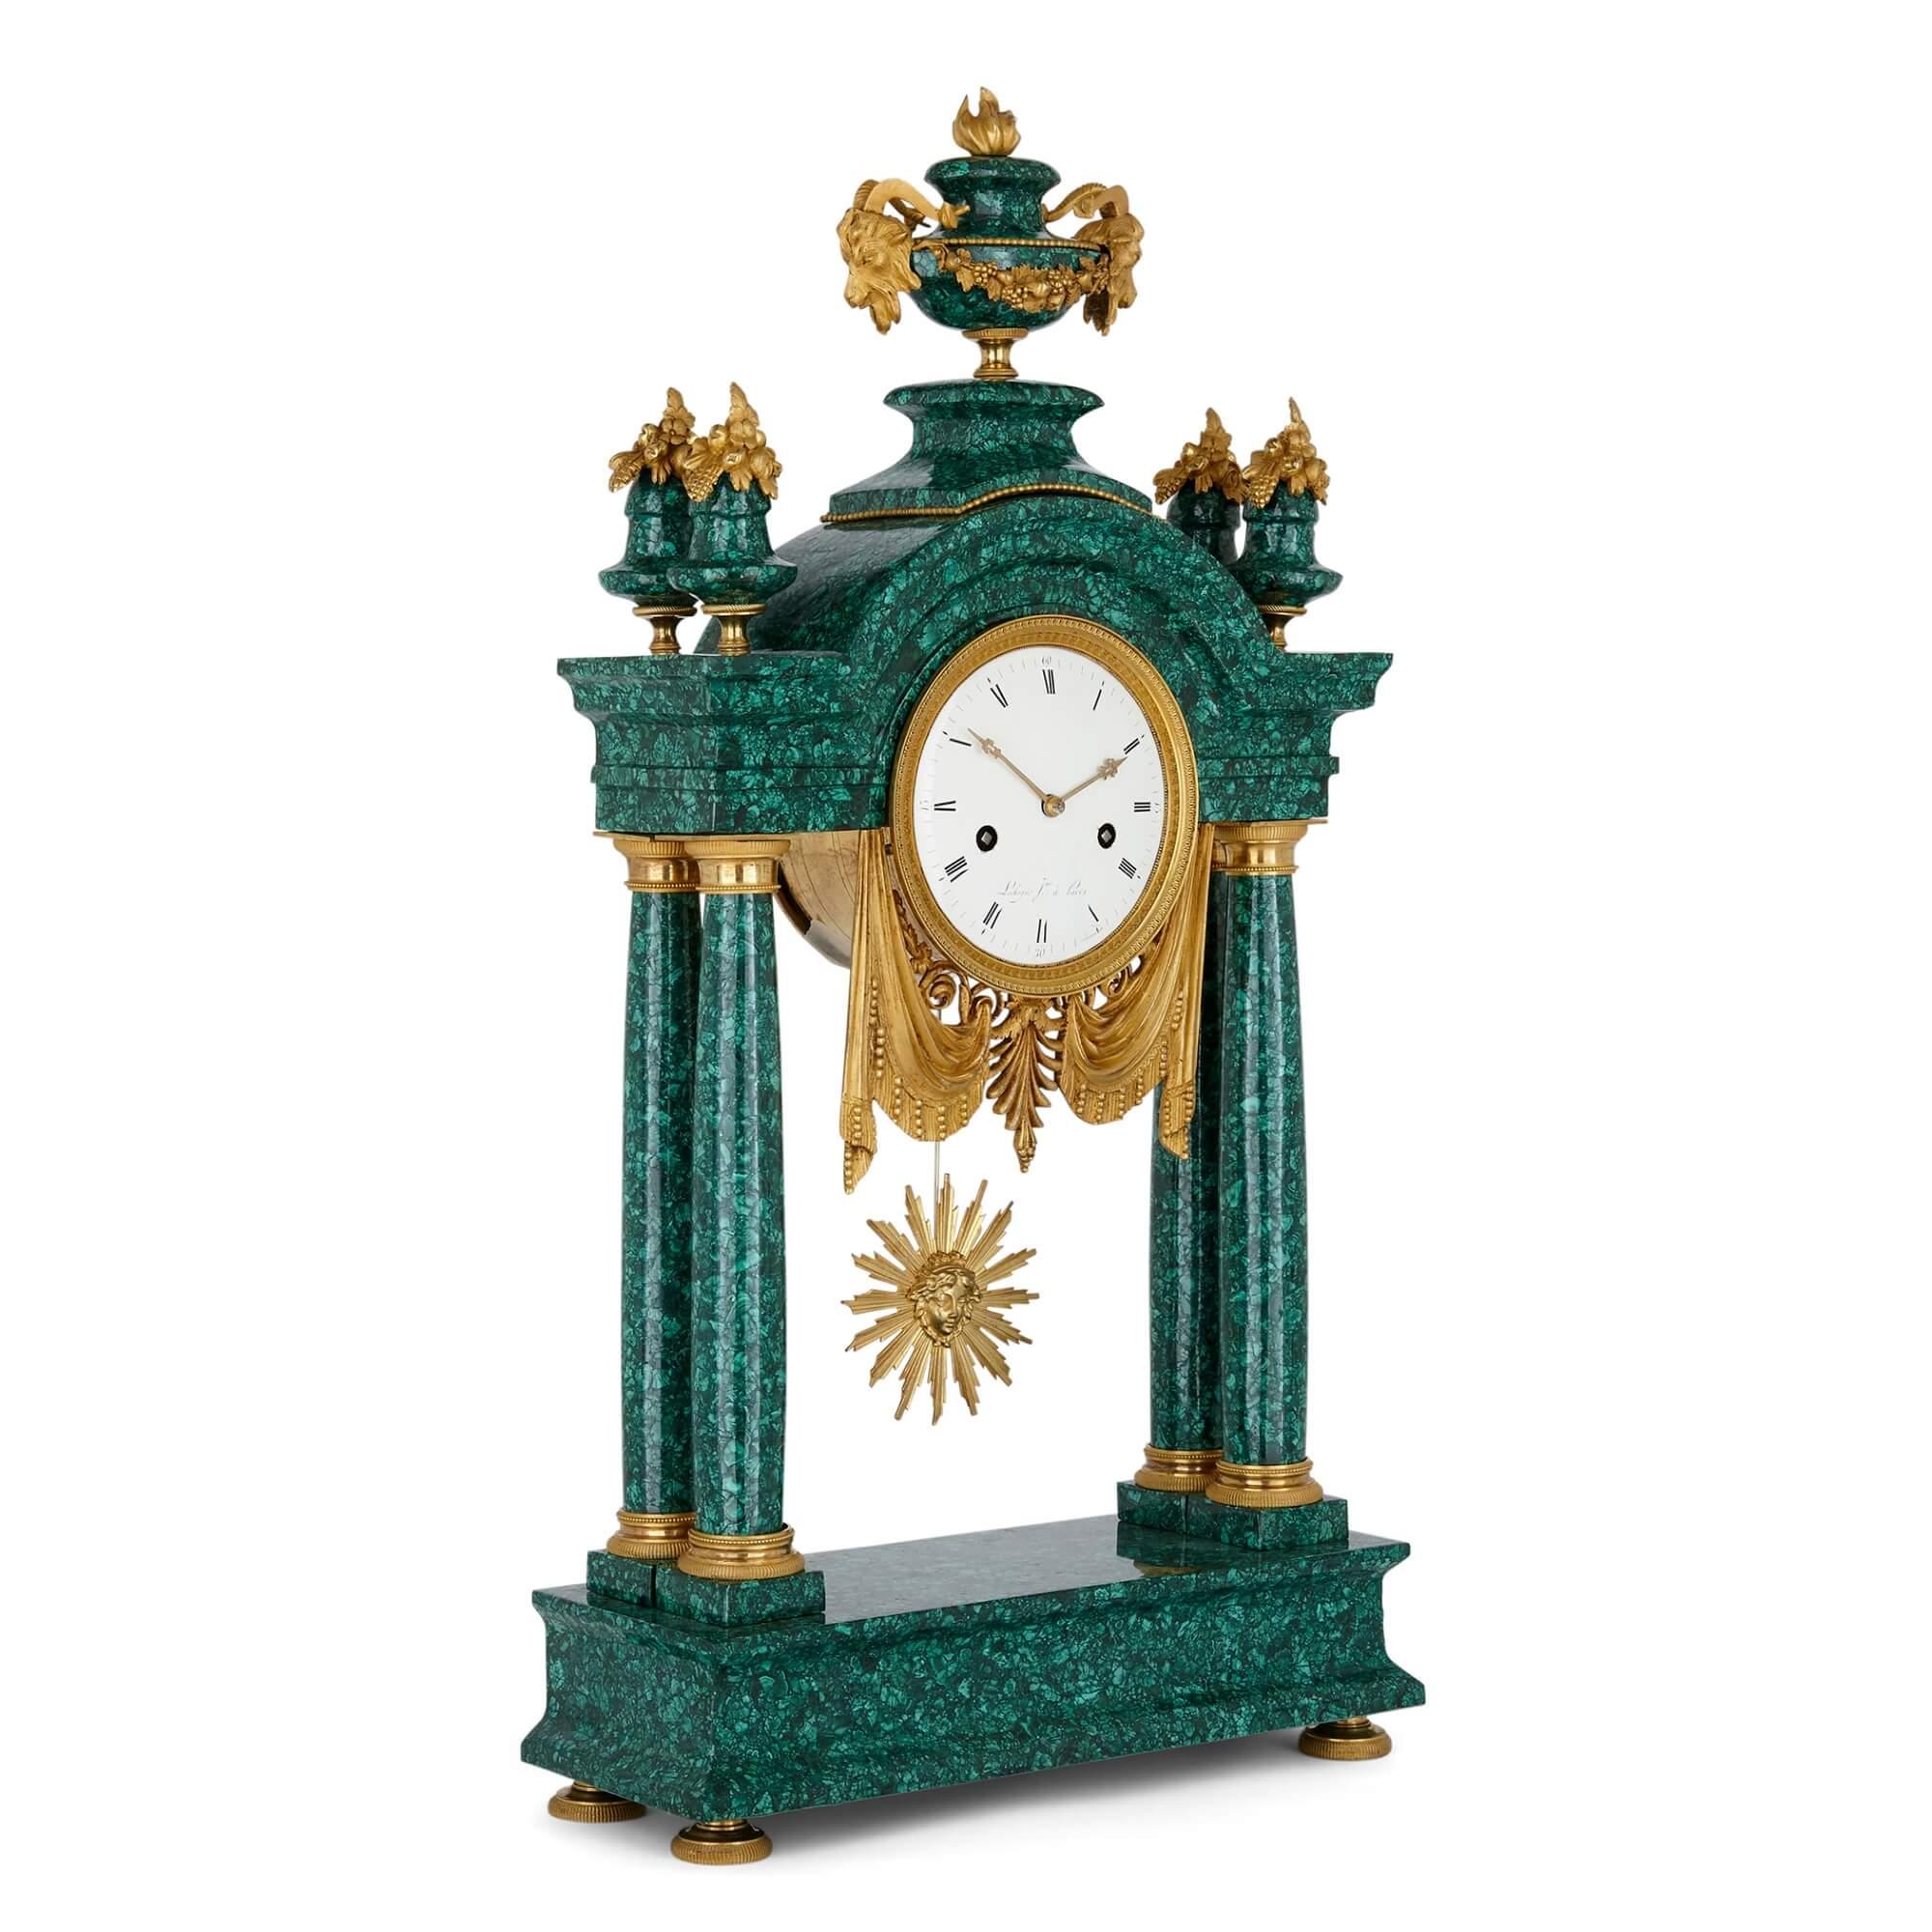 Gilt bronze and malachite Louis XVI clock
French, late 18th century
Measures: Height 69cm, width 36cm, depth 13.5cm

This fine Louis XVI mantel clock is wrought from malachite and gilt bronze. The malachite veneer is a later, beneficial